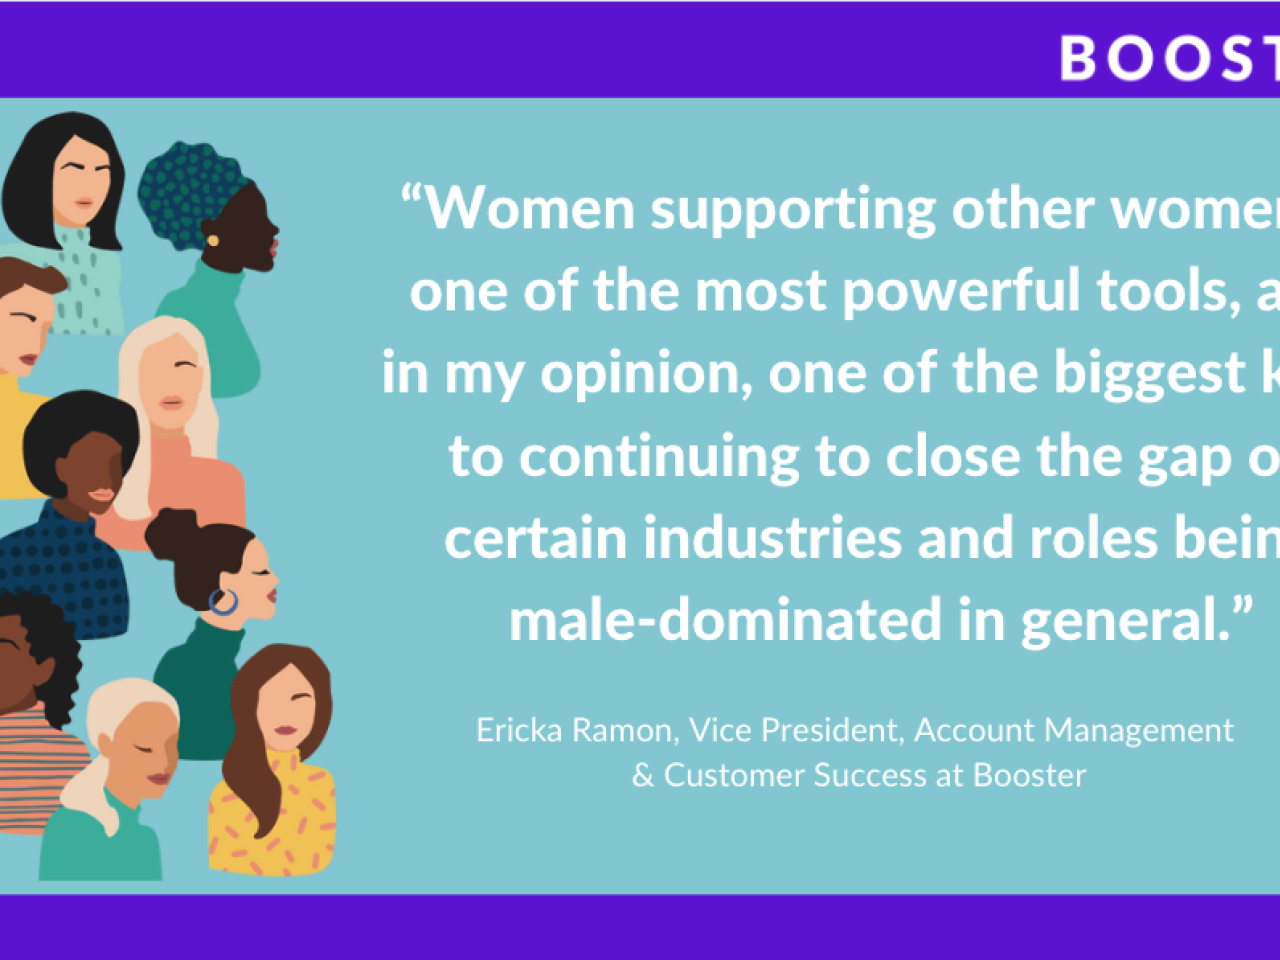 Teal background with graphic of various women. White text that reads "Women supporting other women is one of the most powerful tools, and in my opinion, one of the biggest keys to continuing to close the gap on certain industries and roles being male-dominated in general."